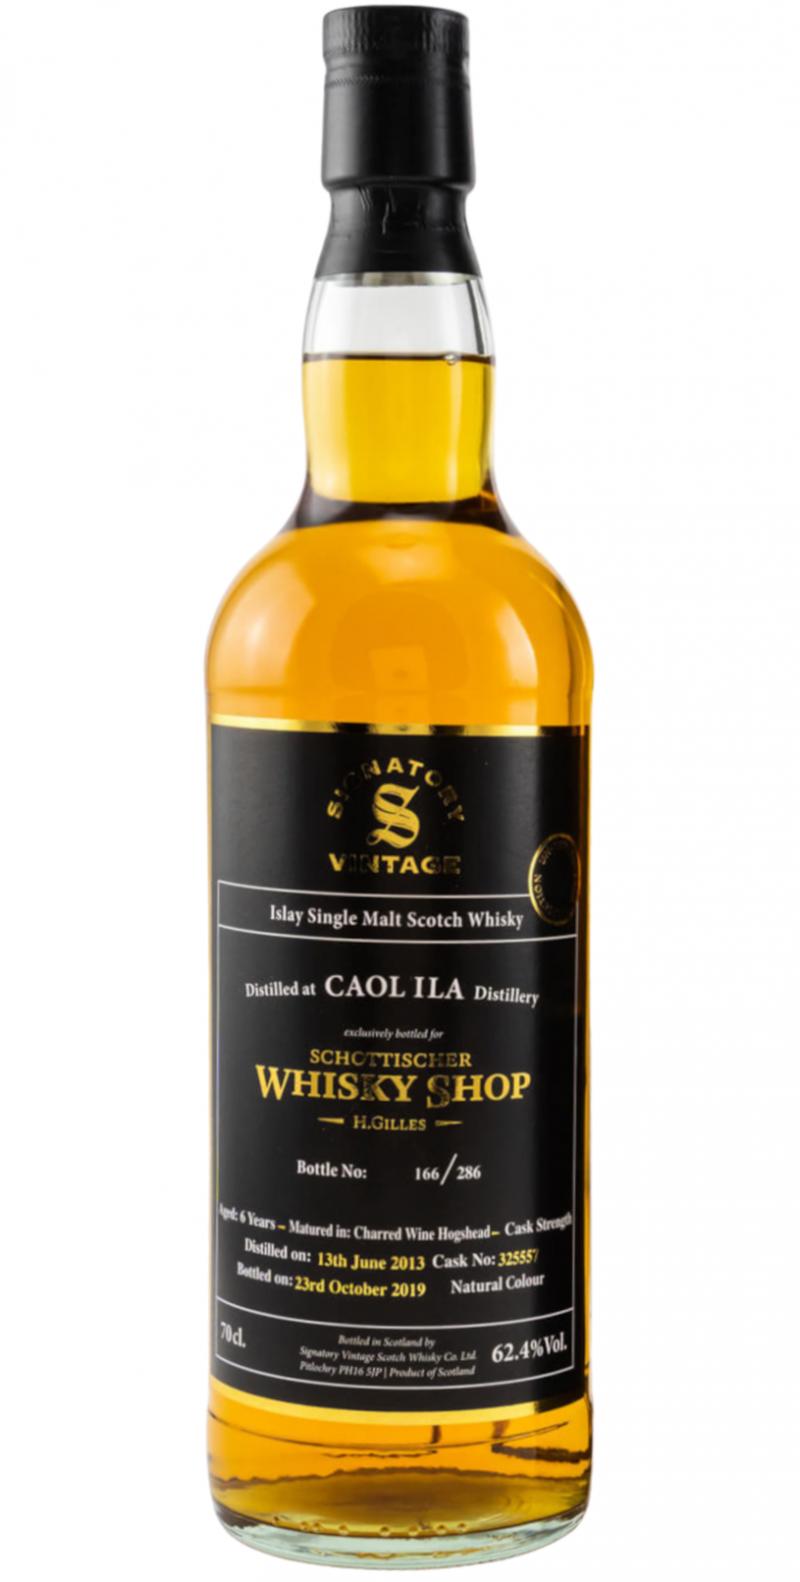 Caol Ila 2013 SV The Un-Chillfiltered Collection Charred Wine Hogshead #325557 Schottischer Whisky Shop H. Gilles 62.4% 700ml